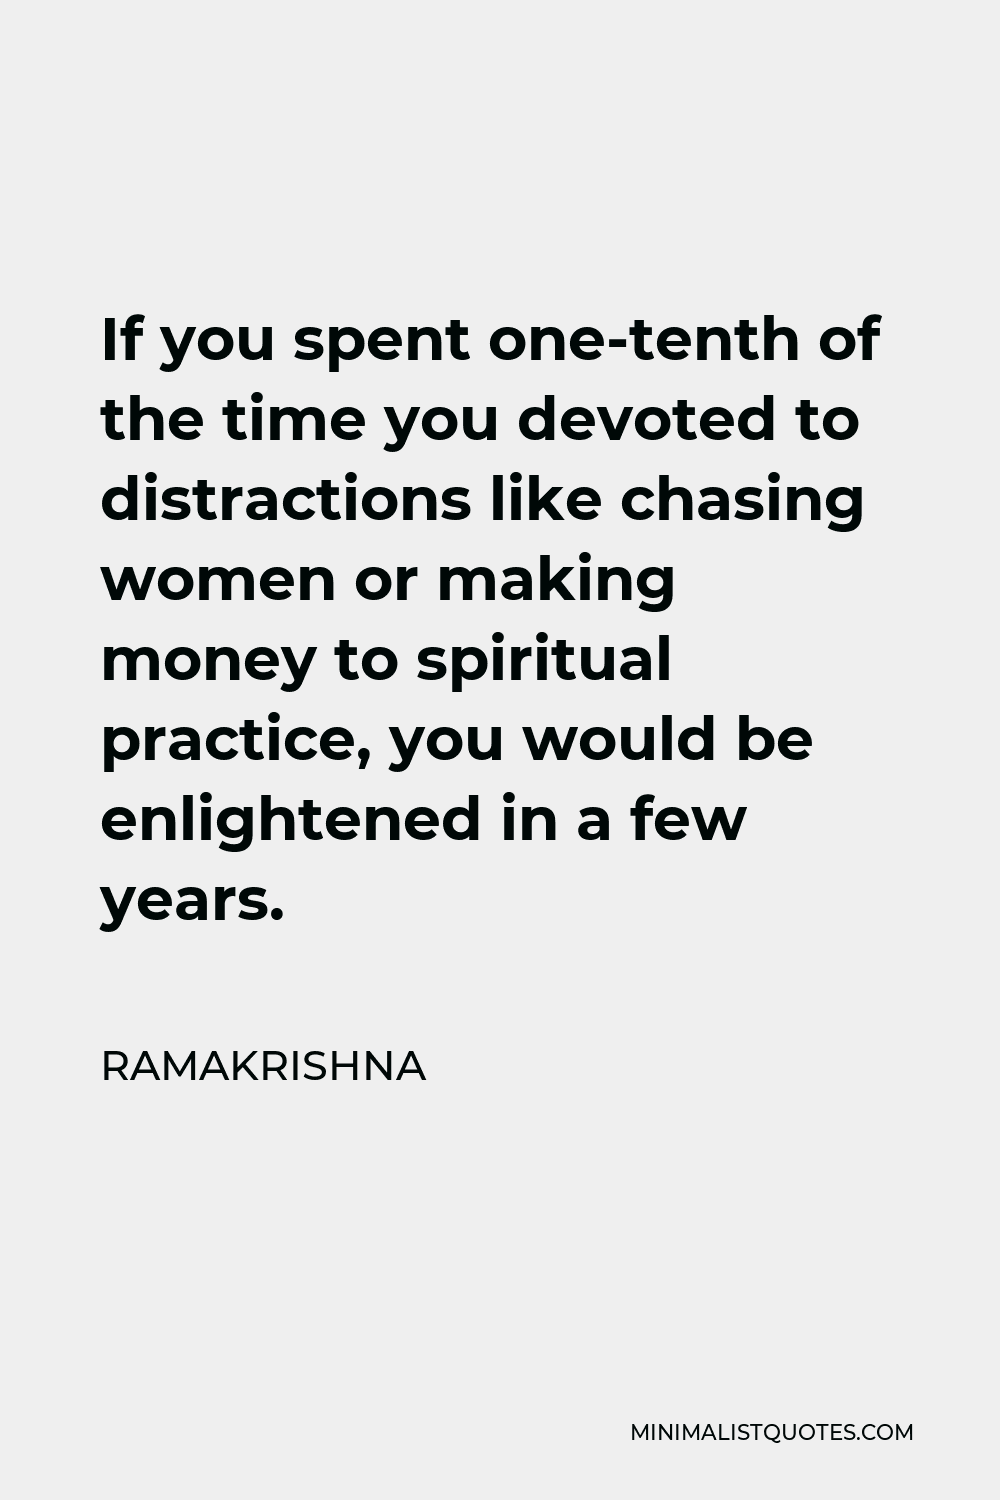 Ramakrishna Quote - If you spent one-tenth of the time you devoted to distractions like chasing women or making money to spiritual practice, you would be enlightened in a few years.